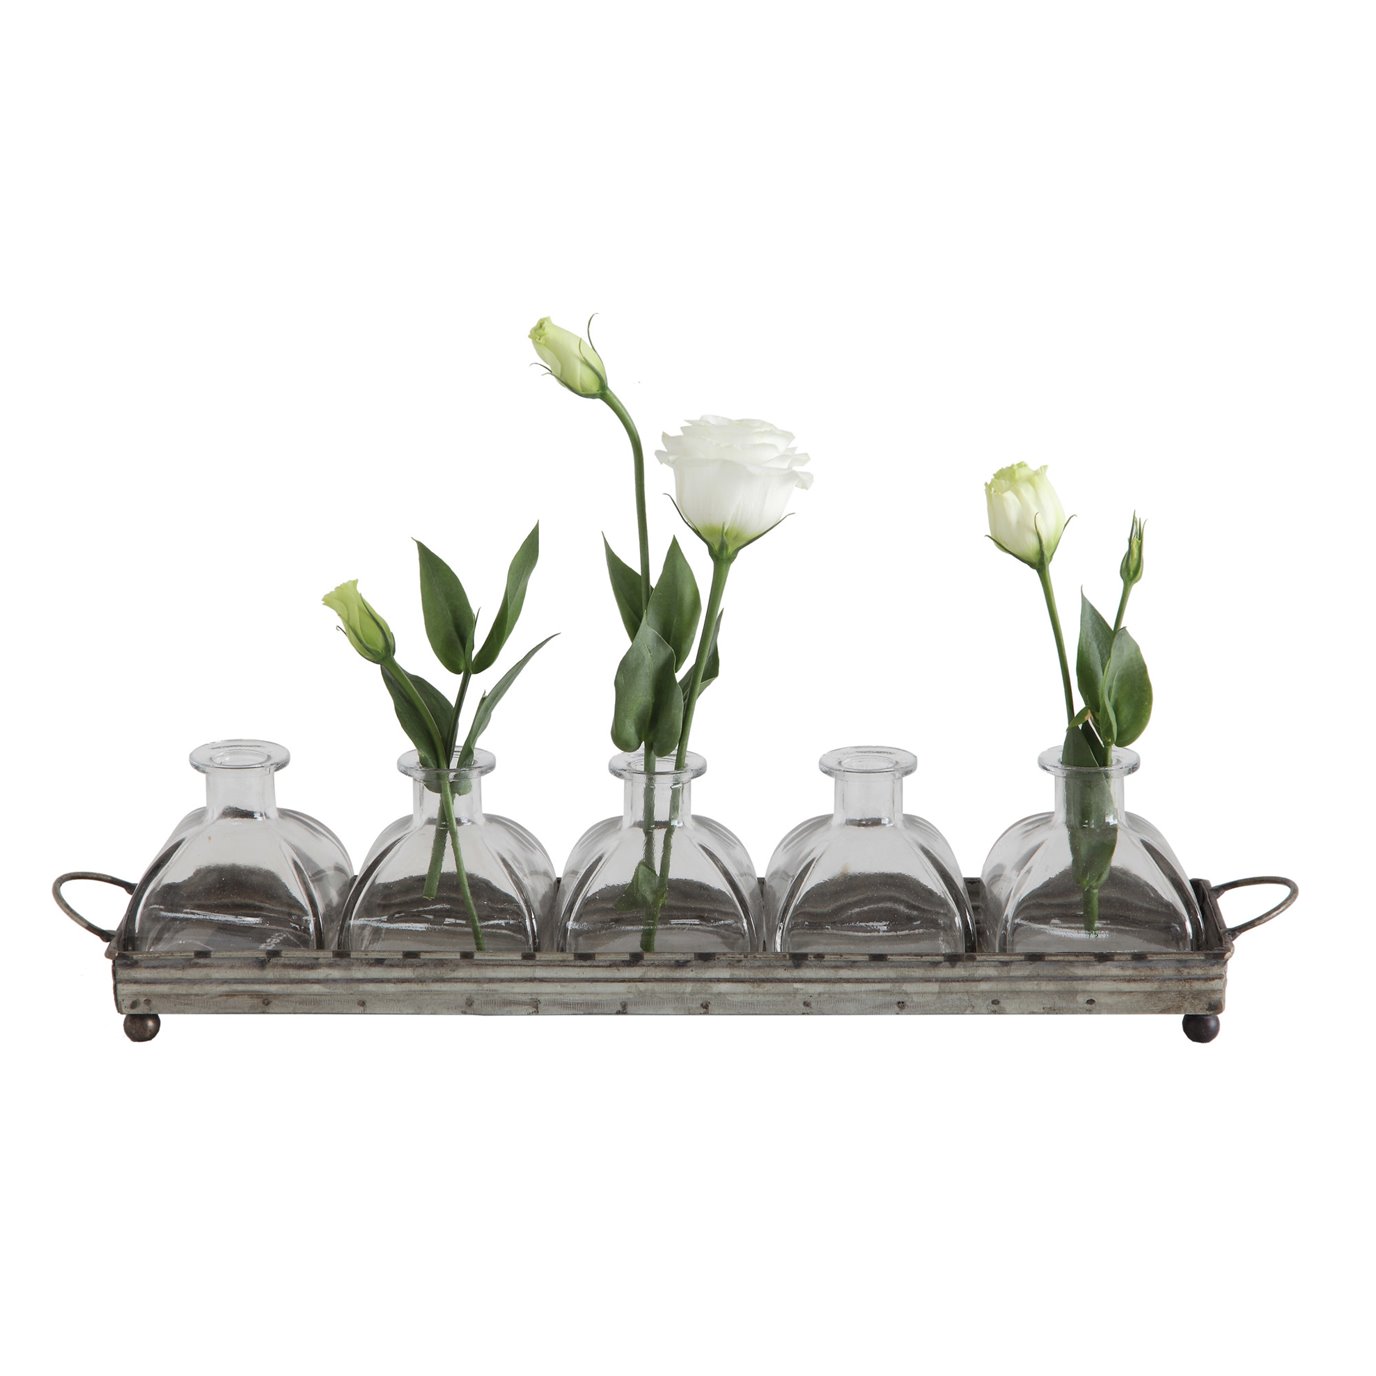 Decorative Iron Rectangle Tray with Handles & 5 Glass Vases (Set of 6 Pieces)